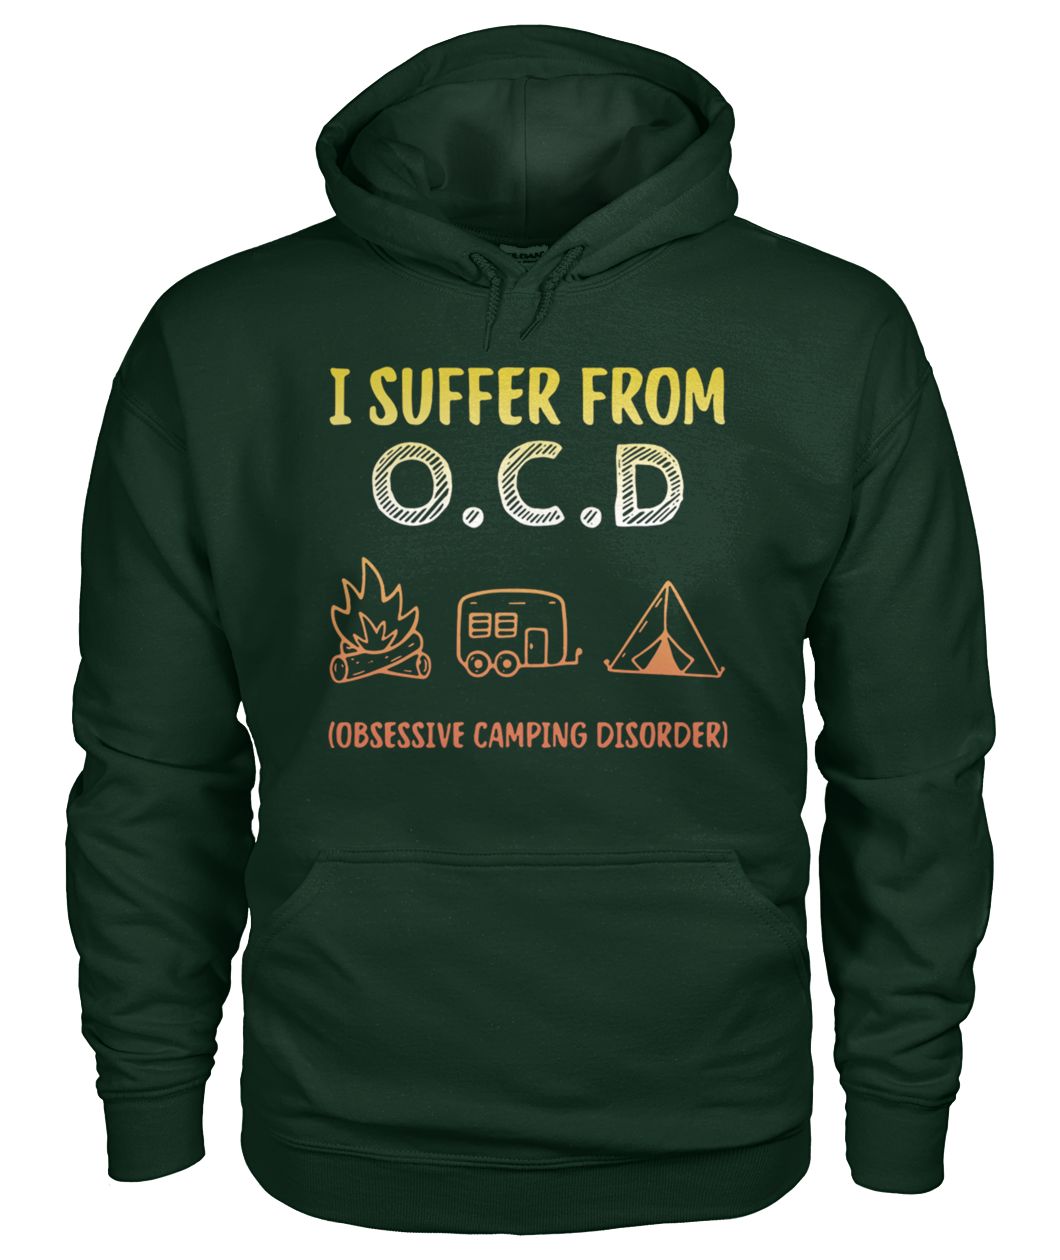 I suffer from OCD obsessive camping disorder gildan hoodie